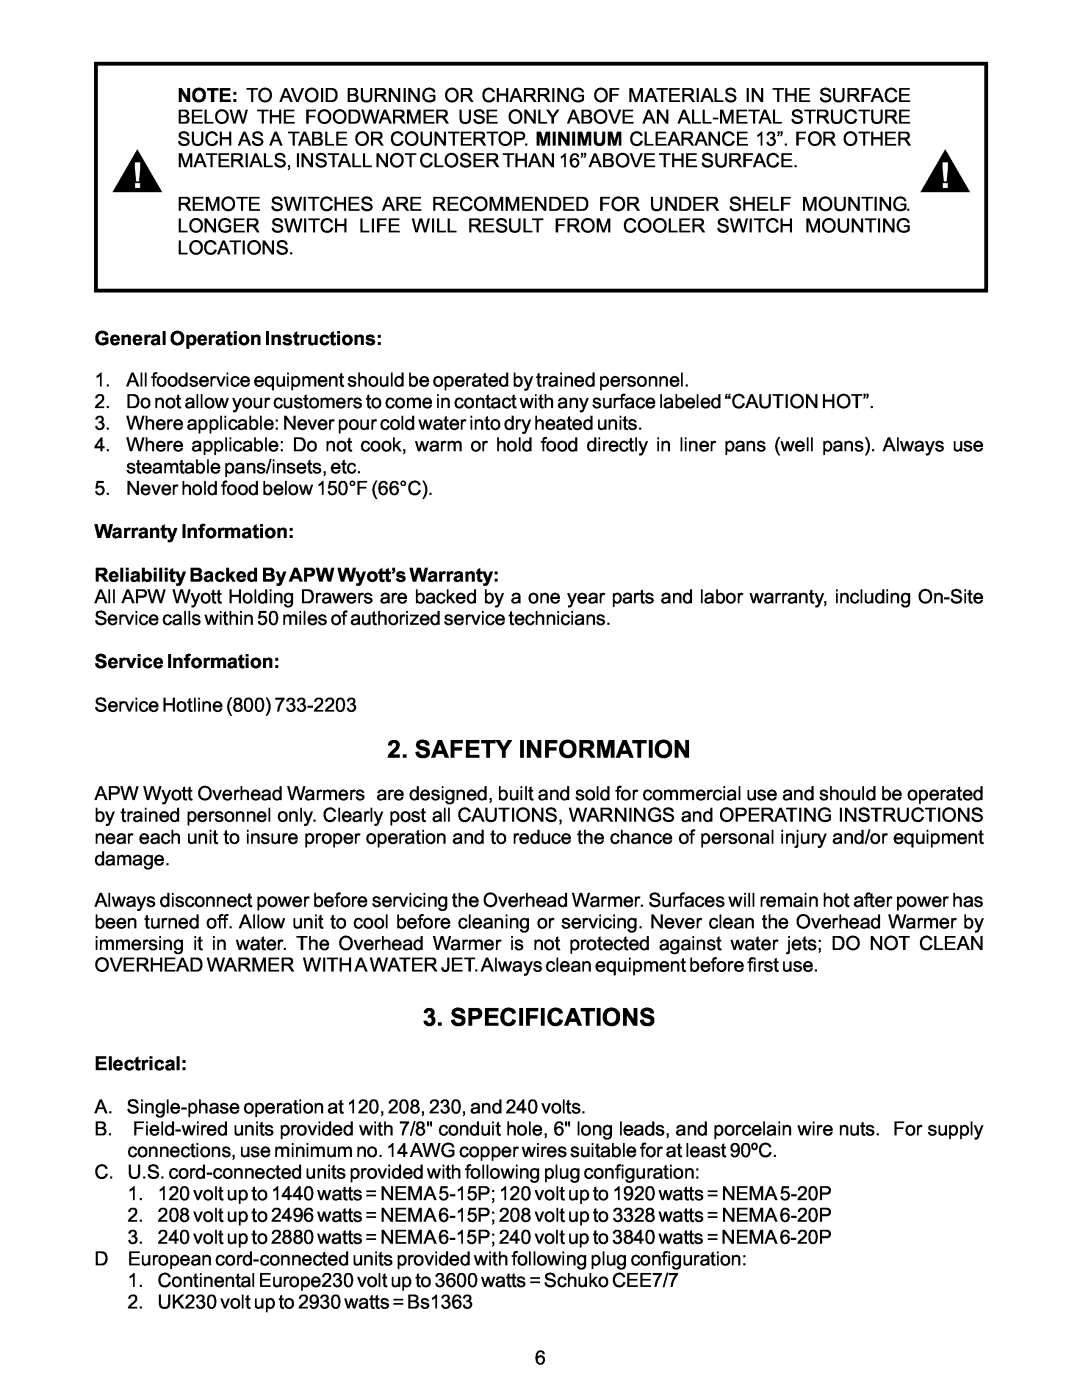 APW FD Safety Information, Specifications, General Operation Instructions, Warranty Information, Service Information 